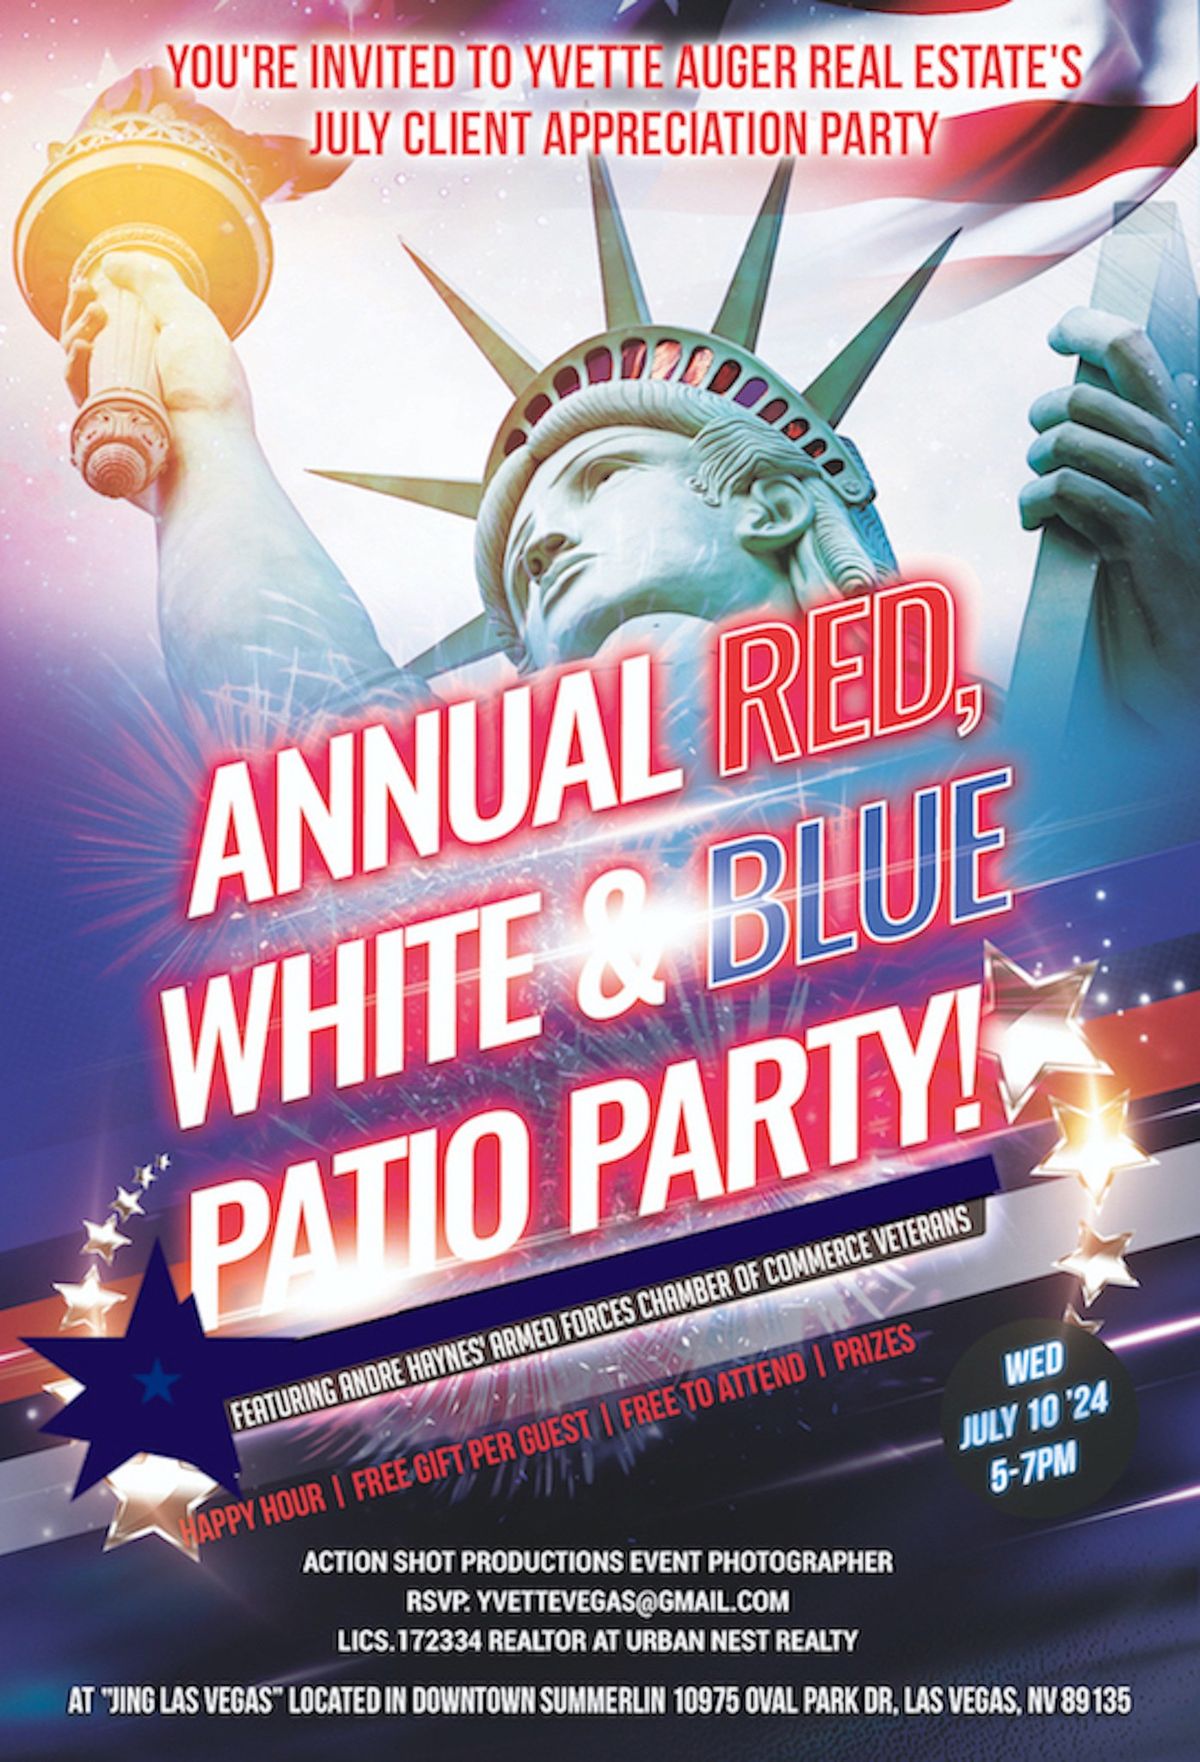 Yvette Auger Real Estate's July Client Appreciation ~ "Annual Red, White & Blue Patio Party!" 7\/10